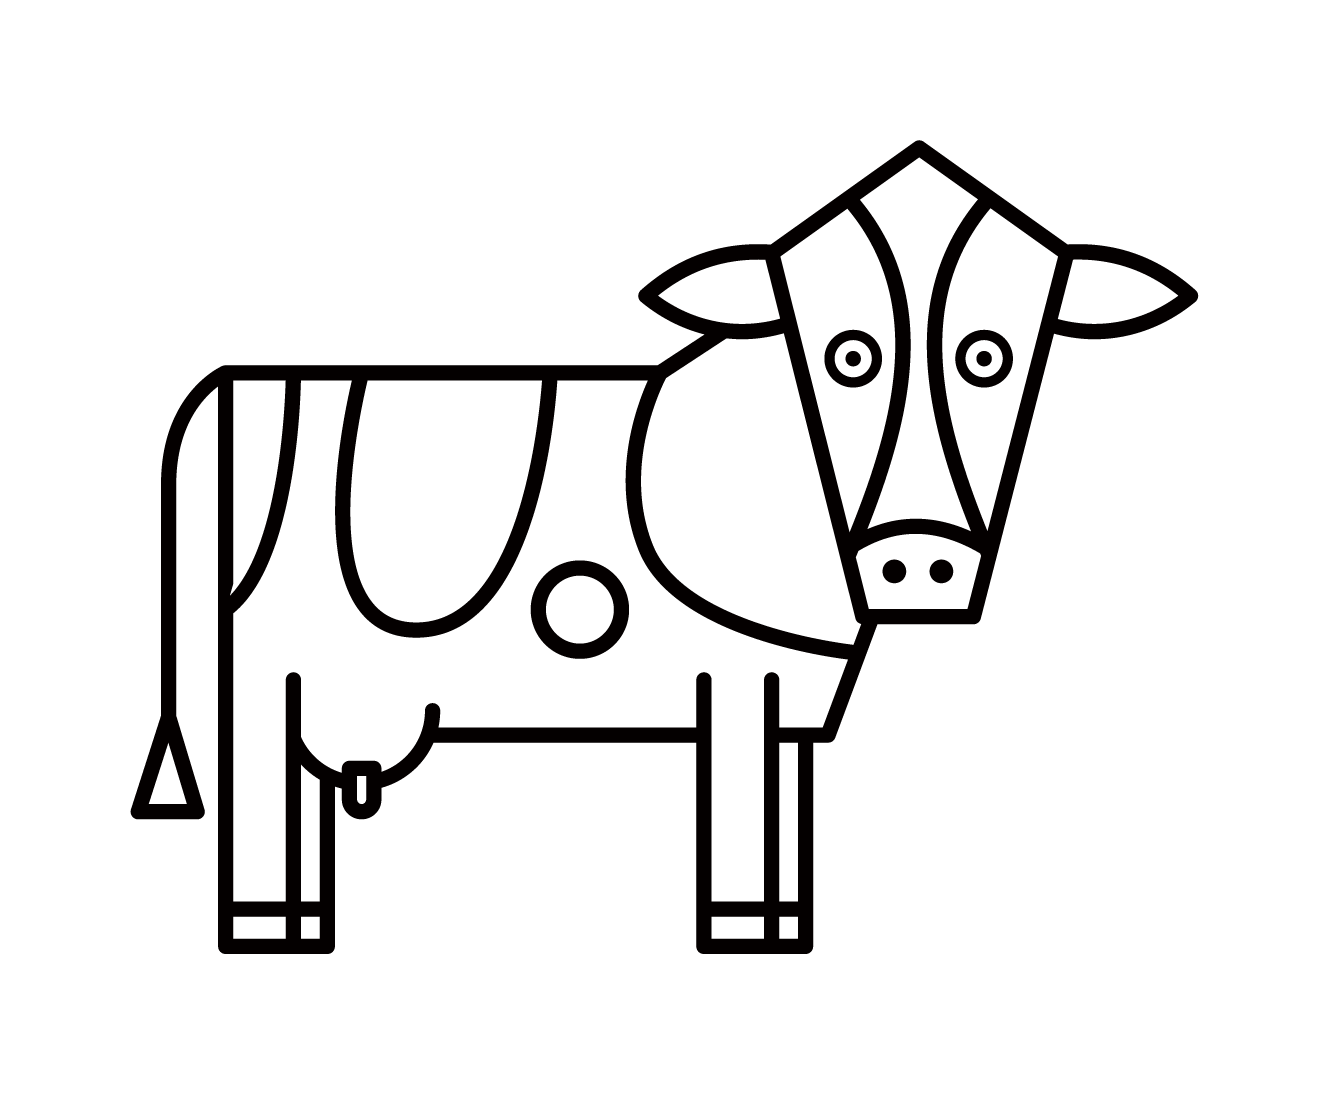 Illustration of a dairy cow